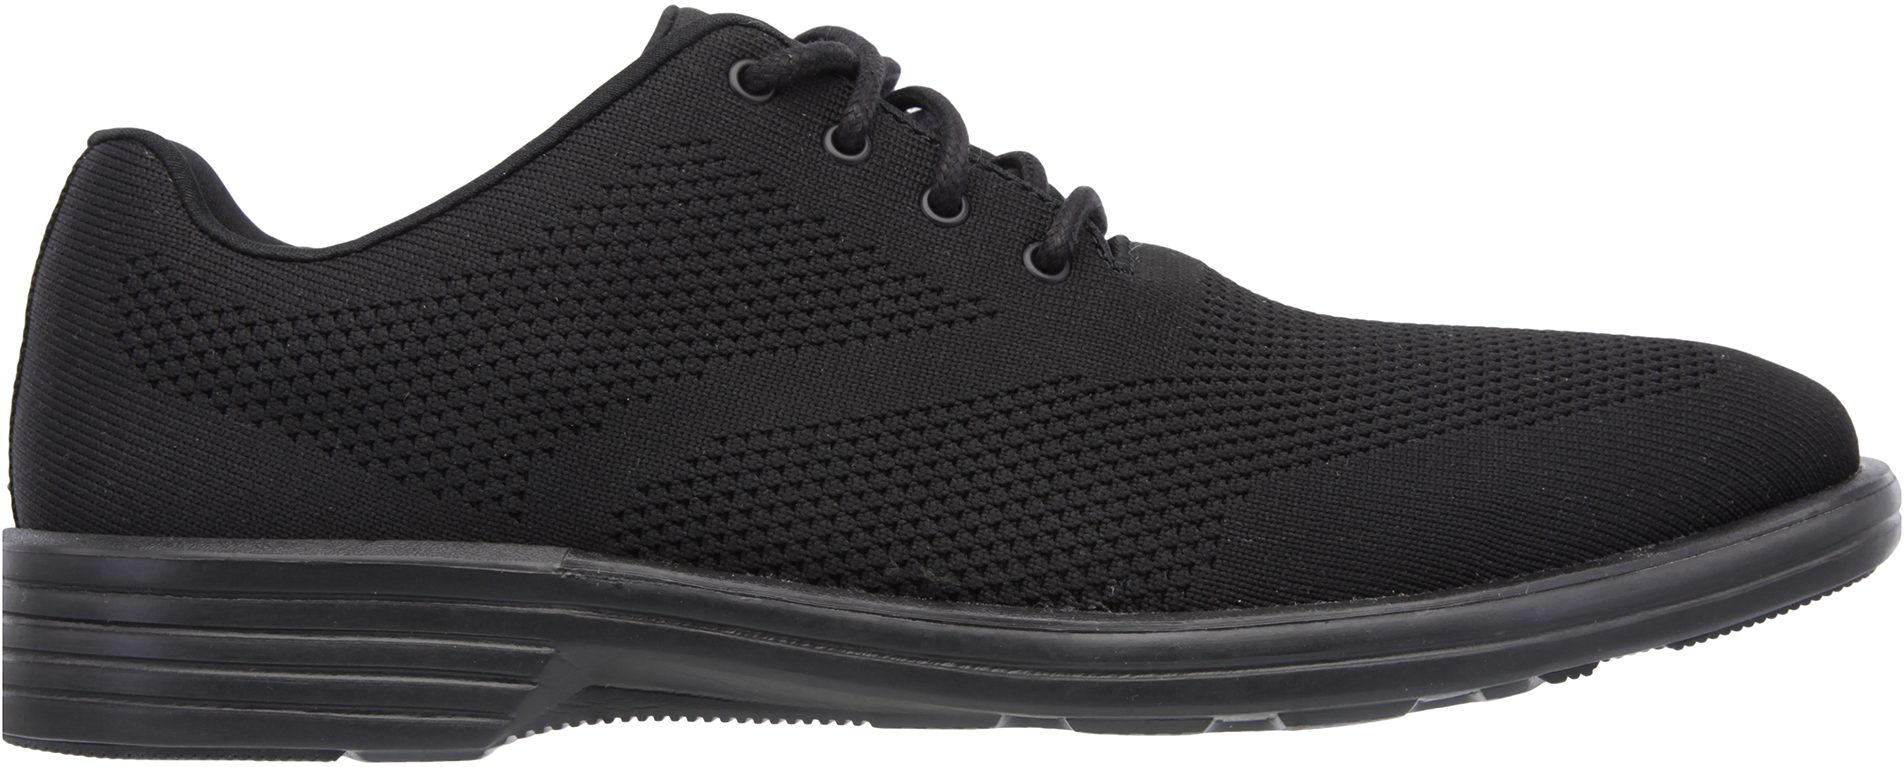 Skechers Walson Black 65293 BBK - Casual Shoes - Humphries Shoes